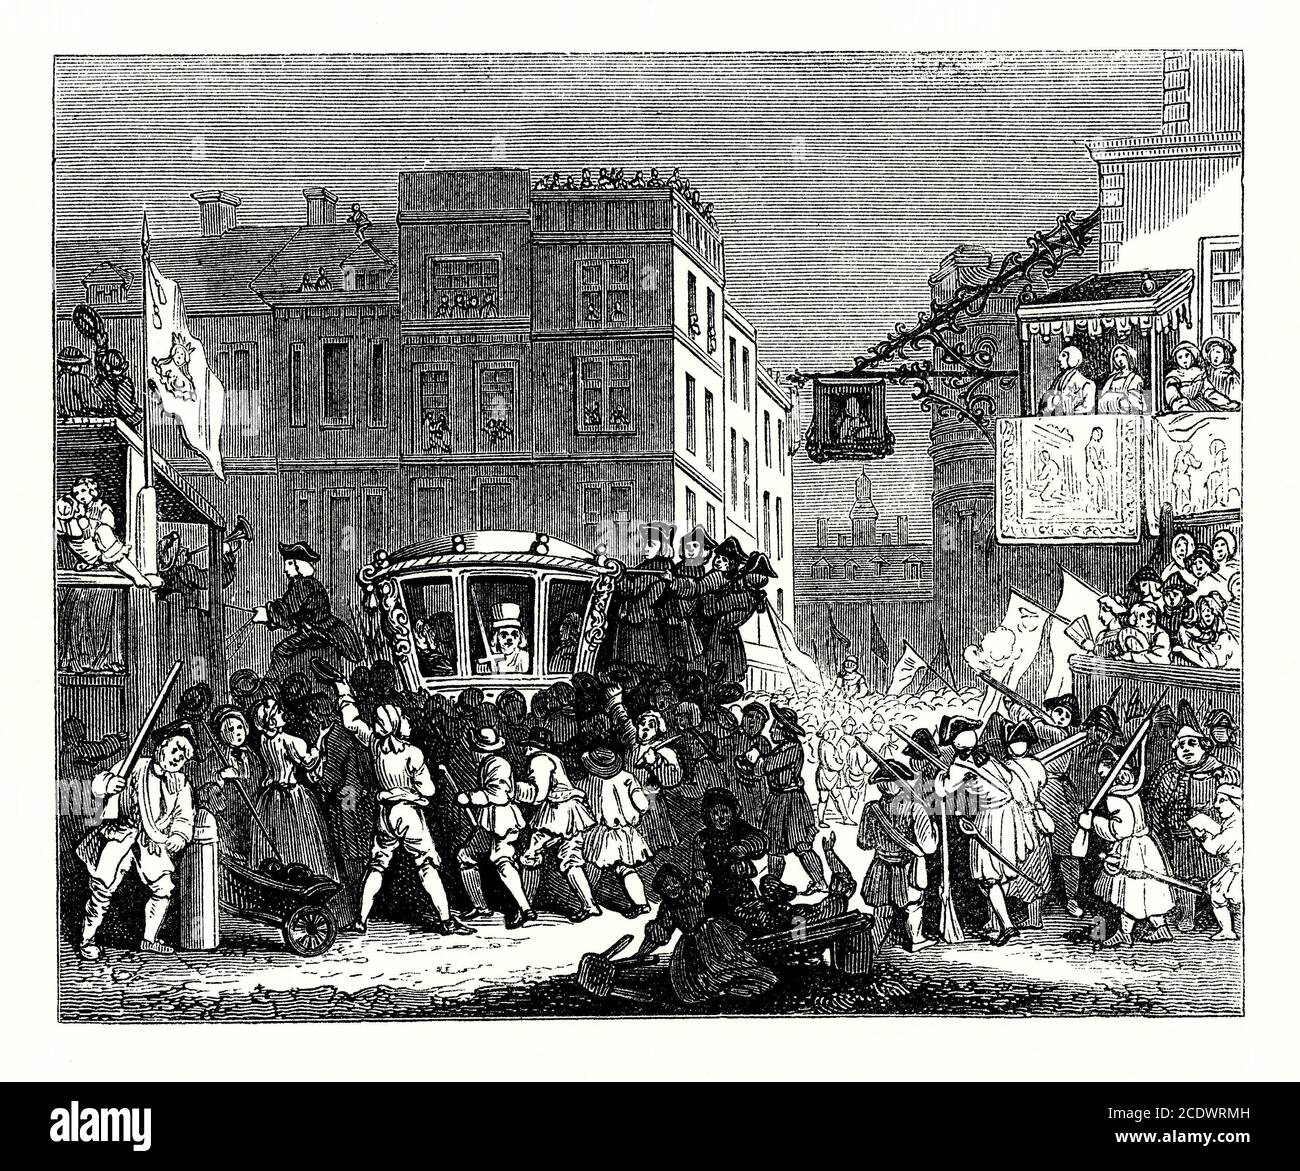 An old engraving of The Lord Mayor's Show procession, London, England, UK in the mid 1700s. The Lord Mayor's Show is one of the best-known annual events in London as well as one of the longest-established, dating back to the 1500s. A new lord mayor is appointed every year, and the public parade that takes place as his or her inauguration ceremony reflects that this was once one of the most prominent offices in England. The office of Lord Mayor dates from 1189. The modern Lord Mayor's procession is a direct descendant of the Show. Stock Photo